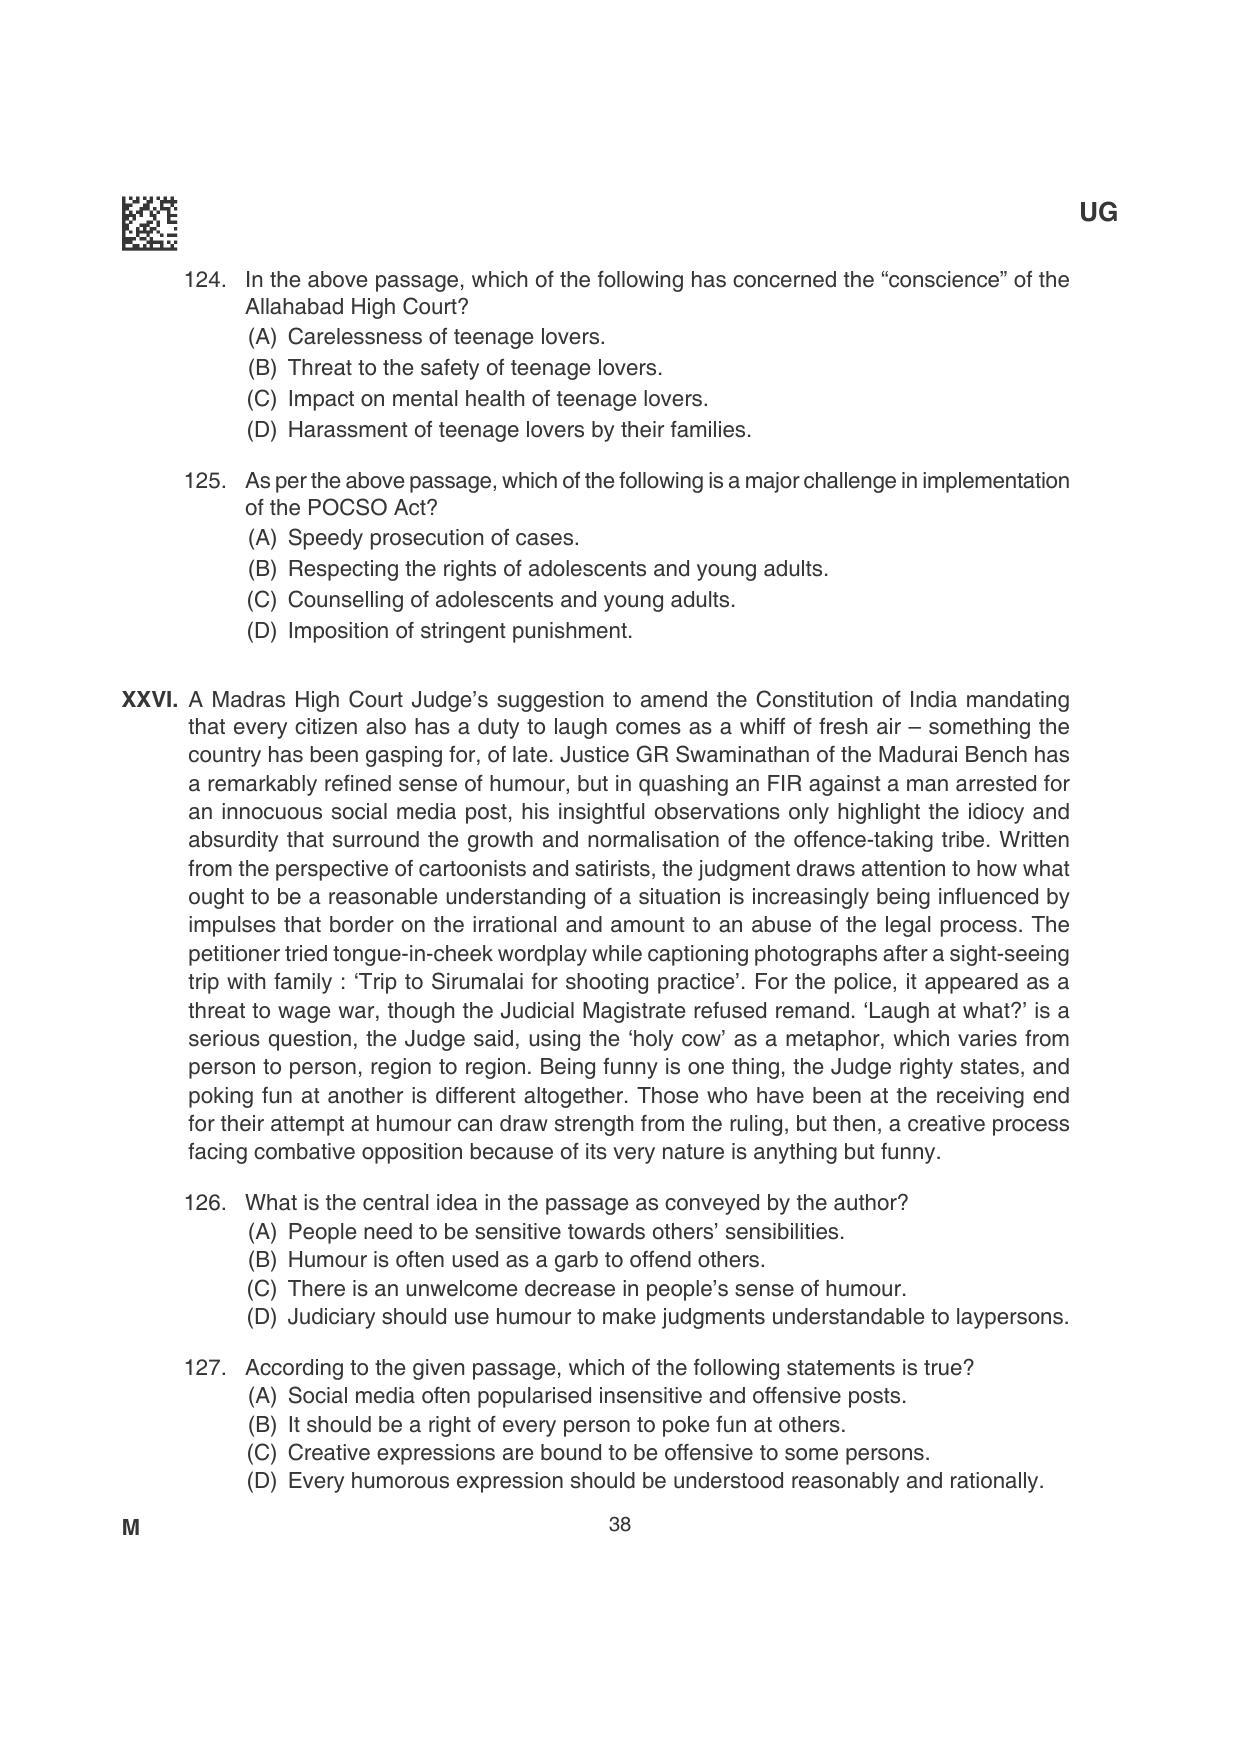 CLAT 2022 UG Question Papers - Page 38